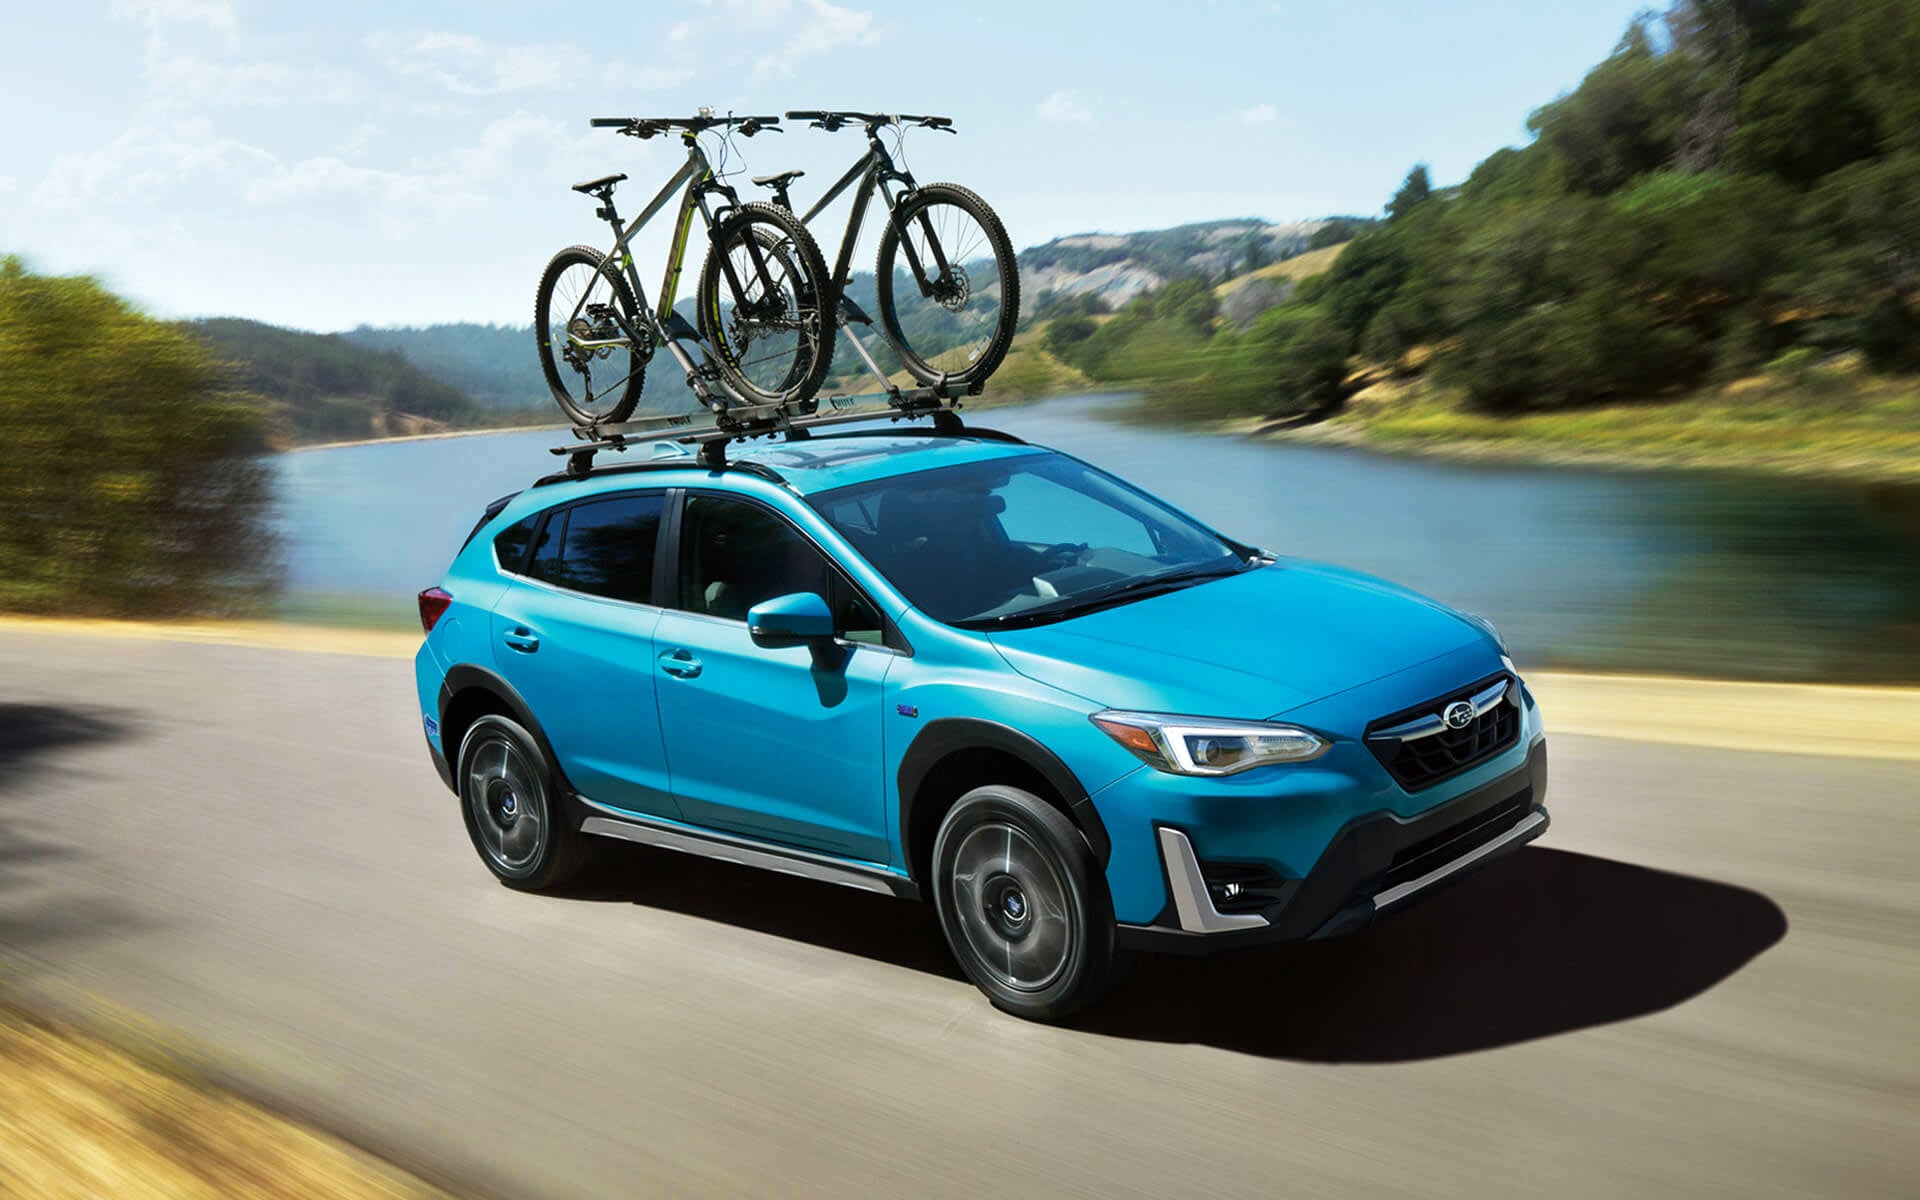 A blue Crosstrek Hybrid with two bicycles on its roof rack driving beside a river | Vann York Subaru in Asheboro NC